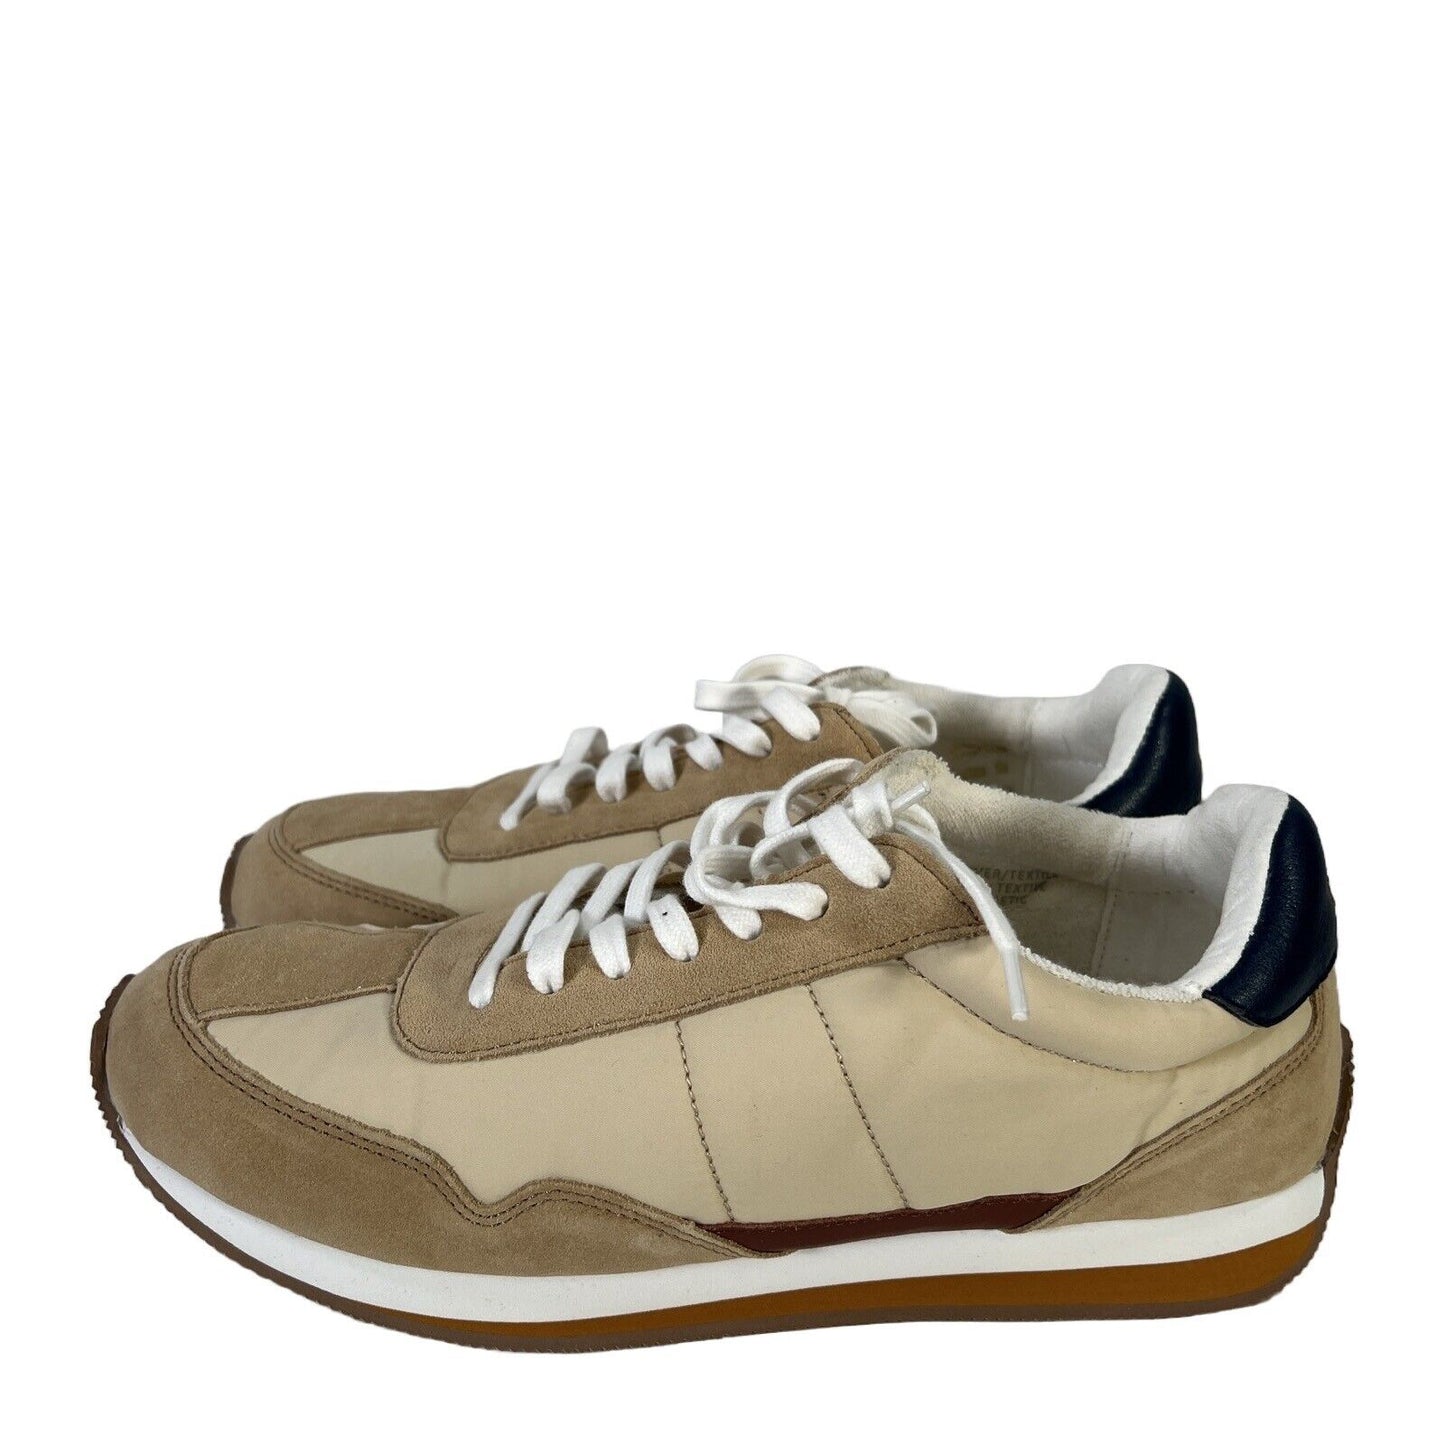 Madewell Men's Beige/Tan League Suede Lace Up Athletic Sneakers - 9